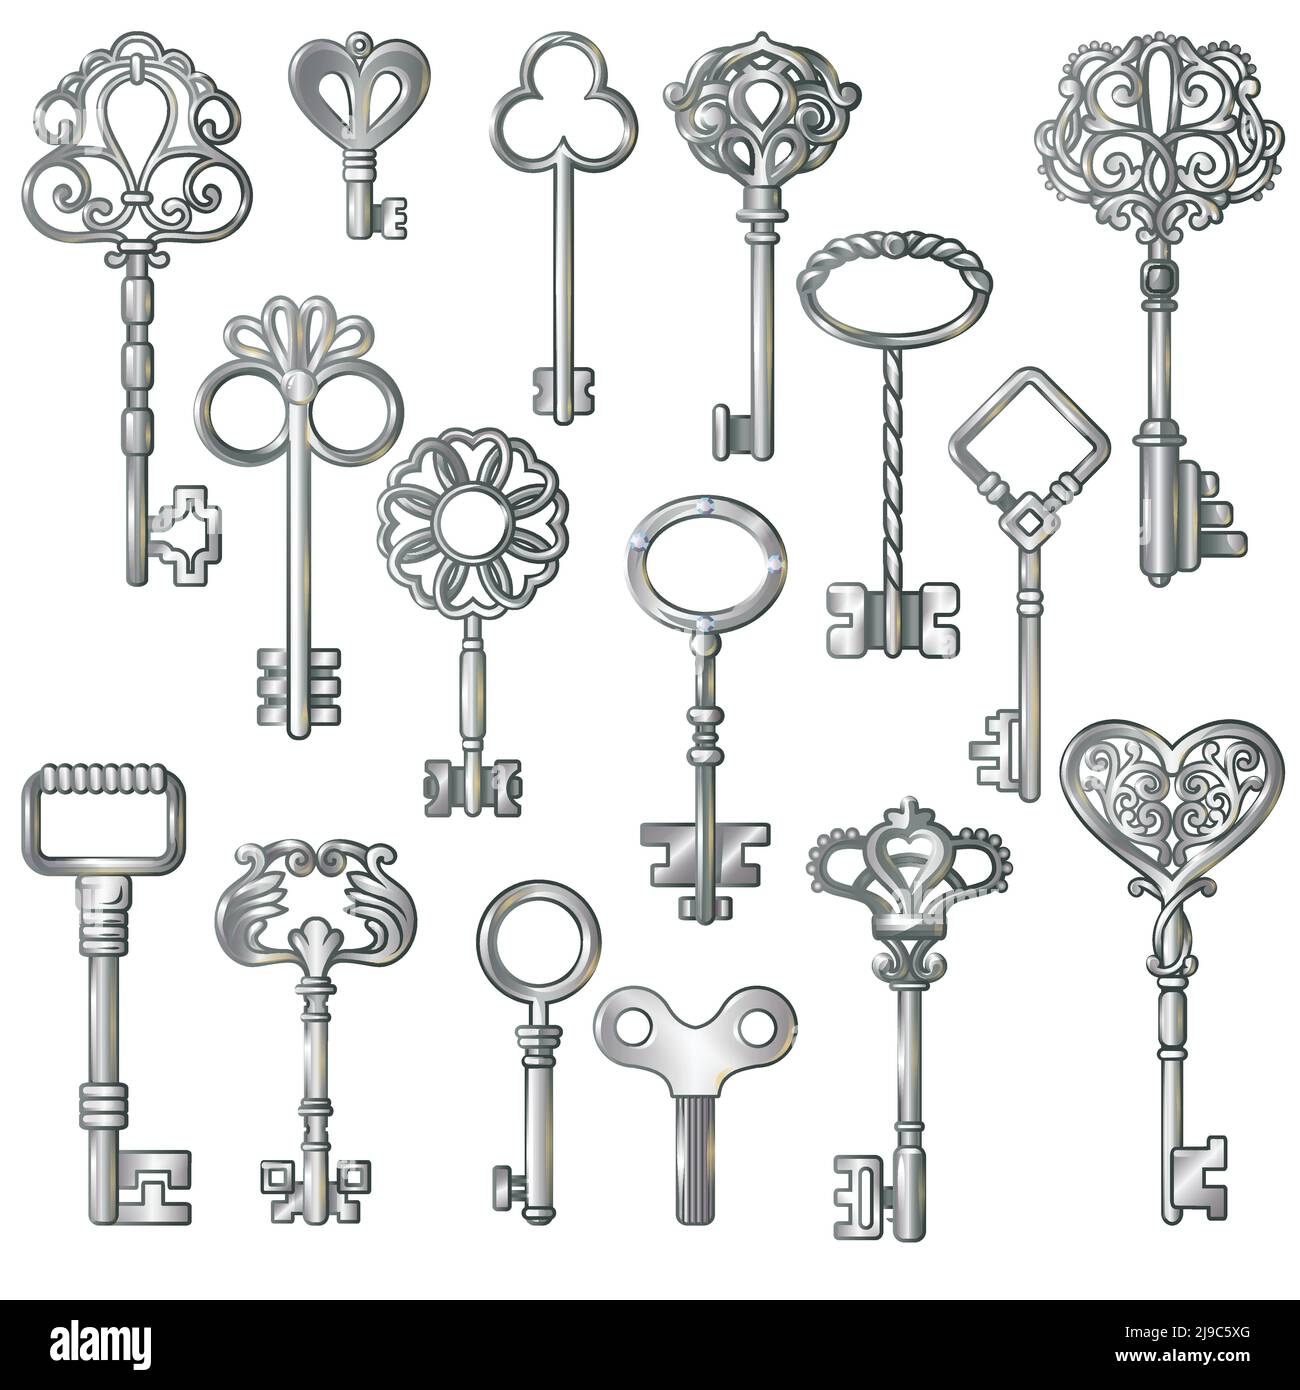 Isolated monochrome images of vintage silver door and clock keys with decorative patterns on blank background vector illustration Stock Vector